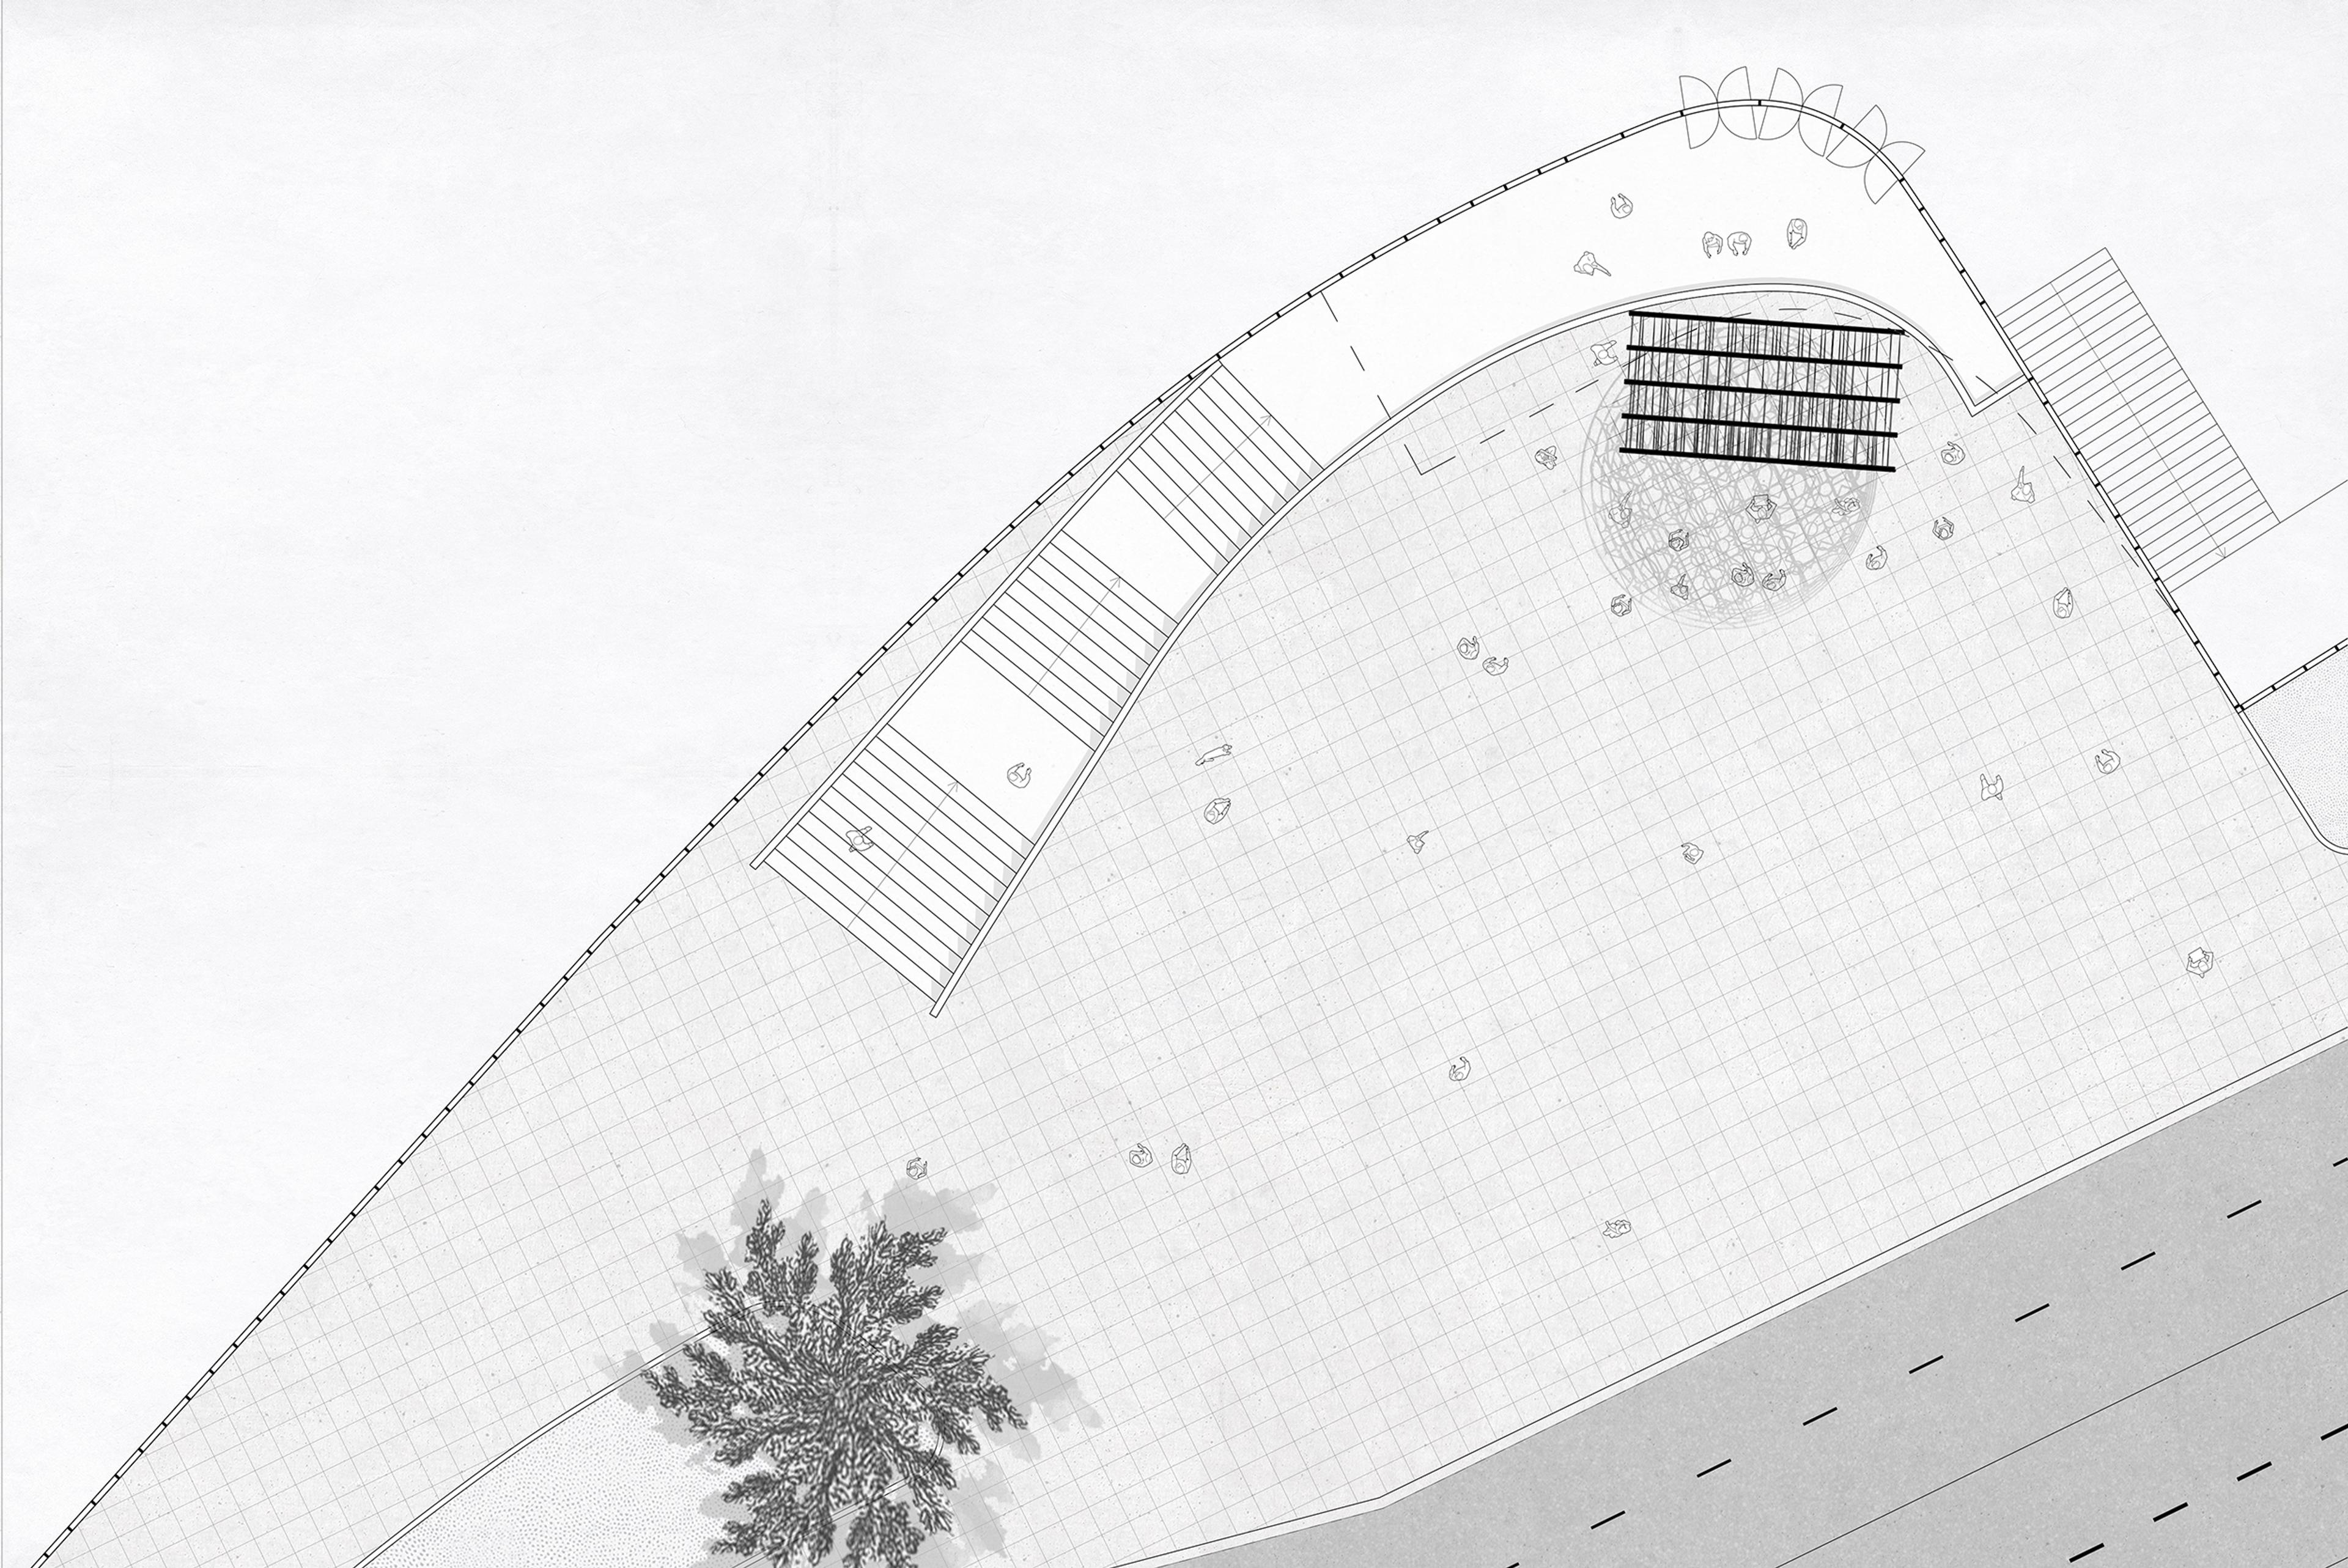 Architectural plan of an installation